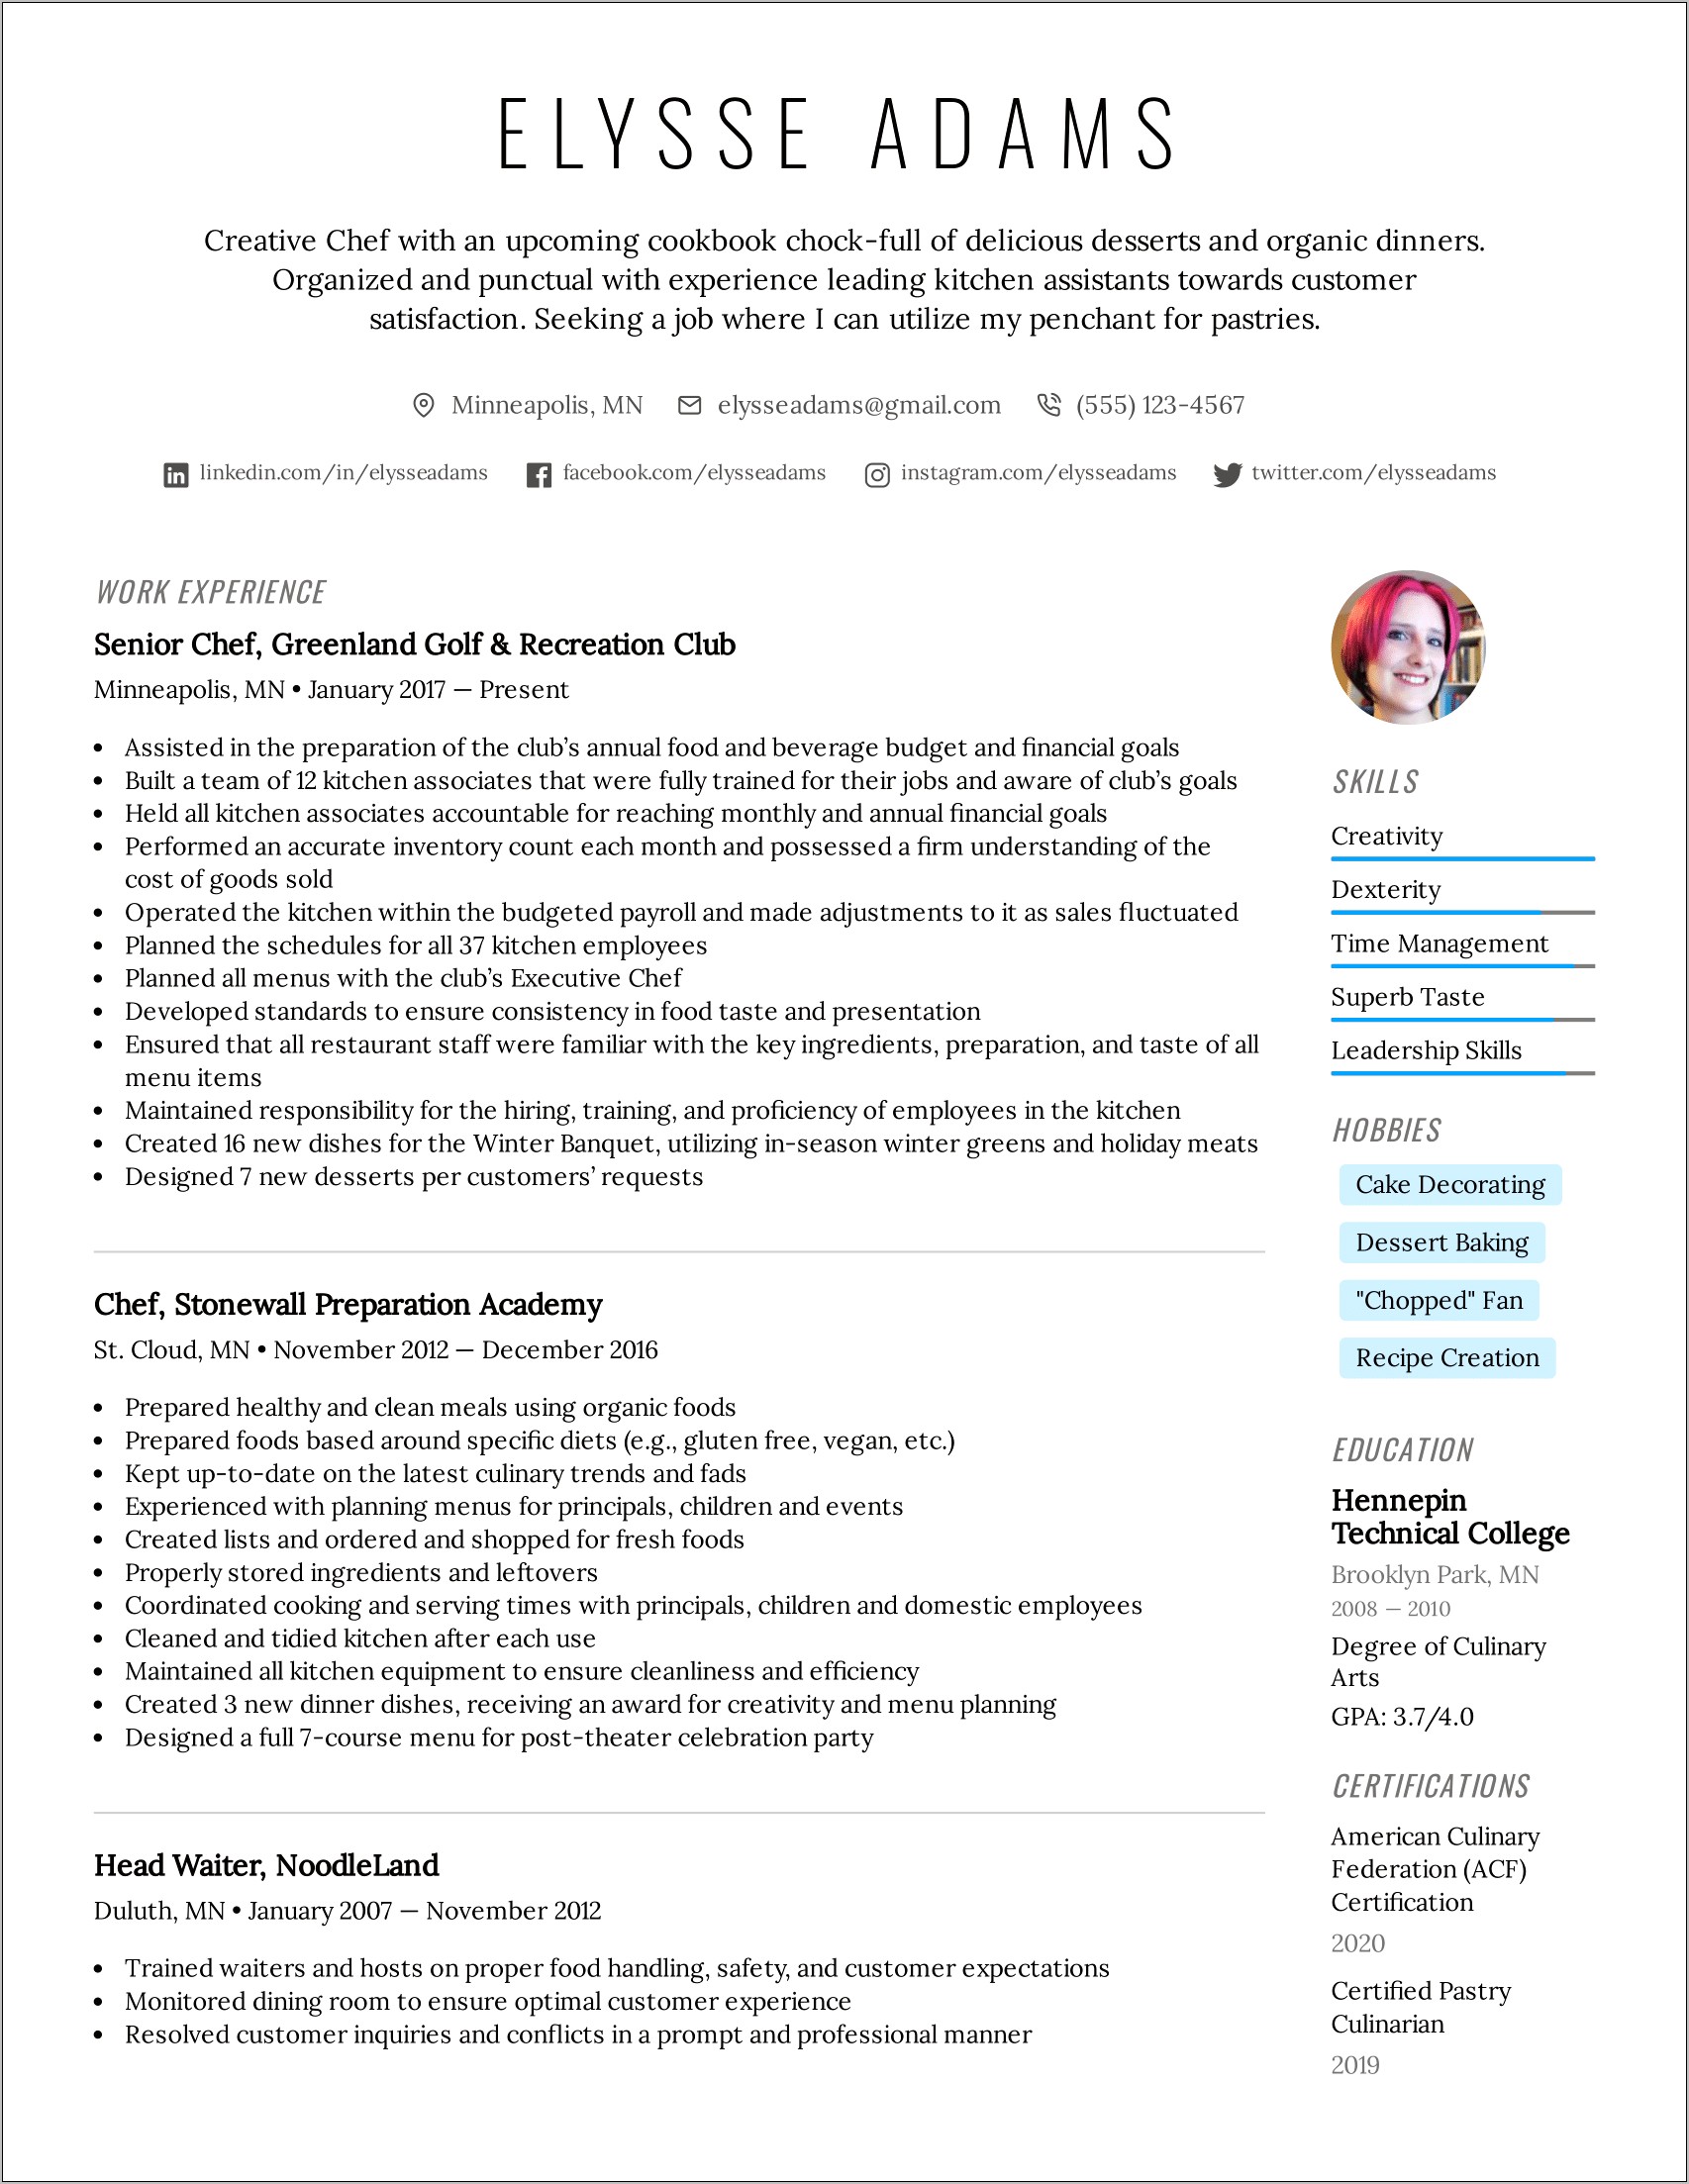 Executive Chef Resume Objective Samples